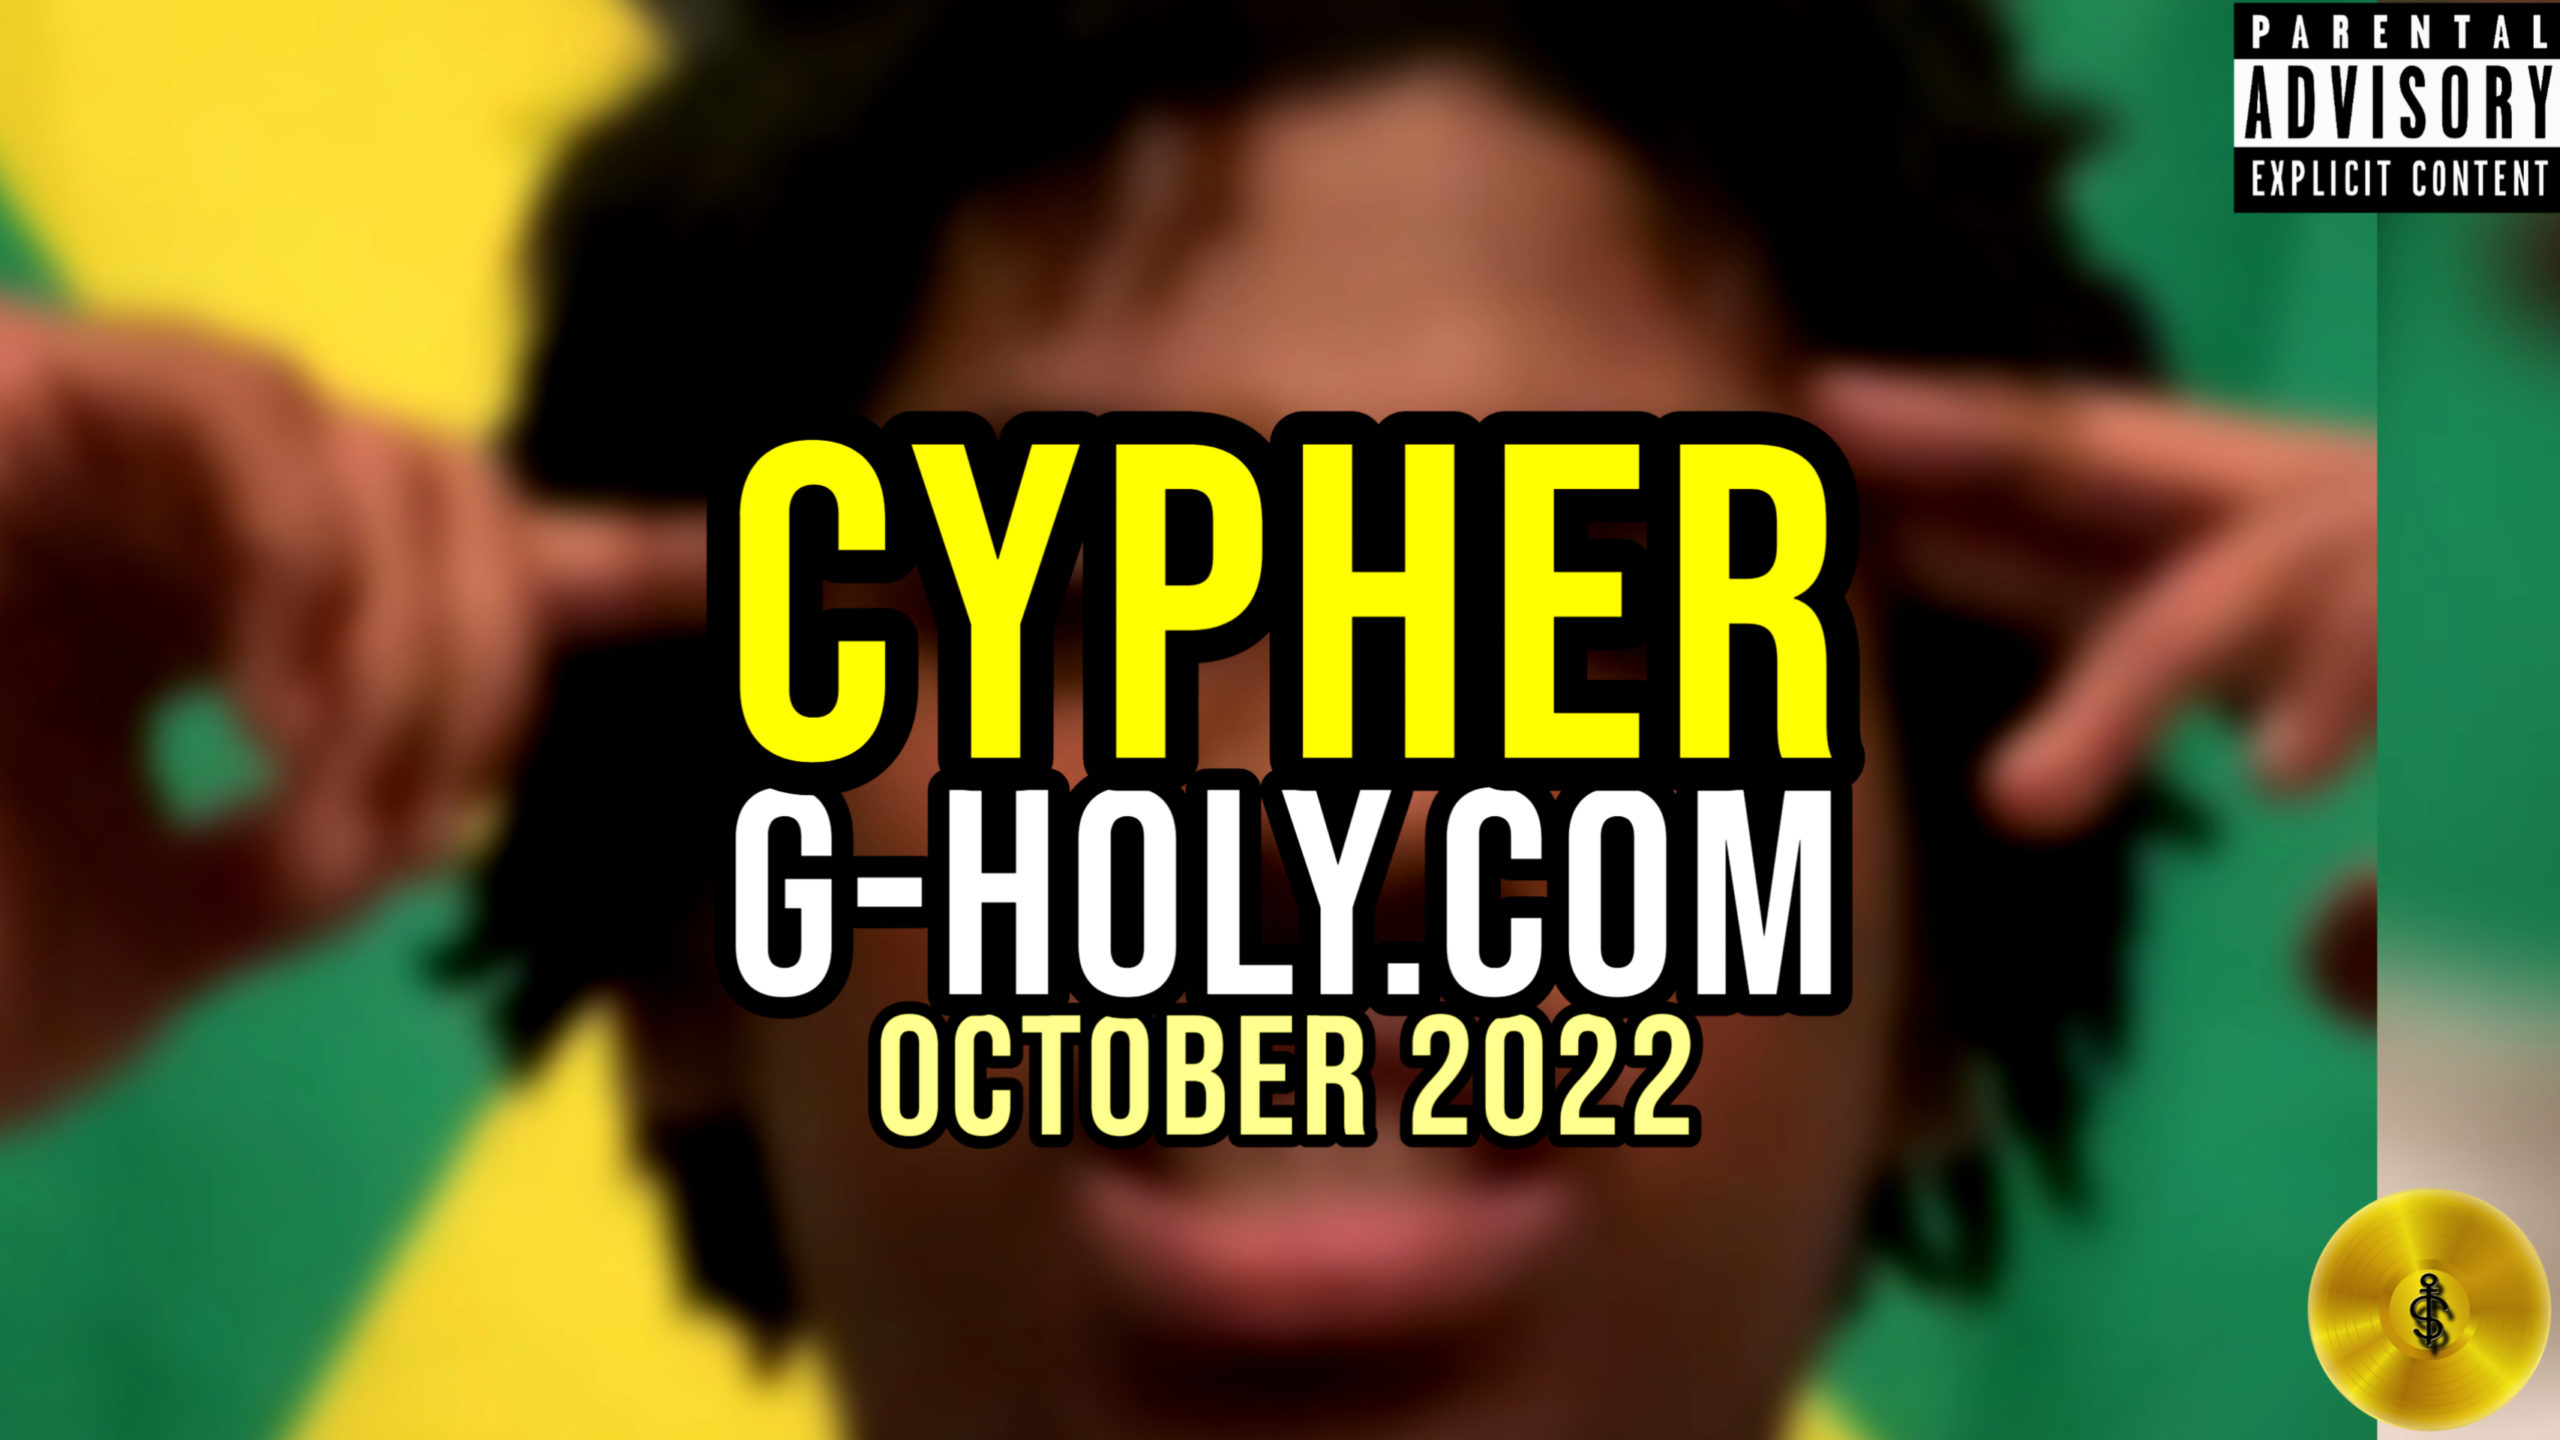 G-HOLY.COM MONTHLY CYPHER: October, 2022